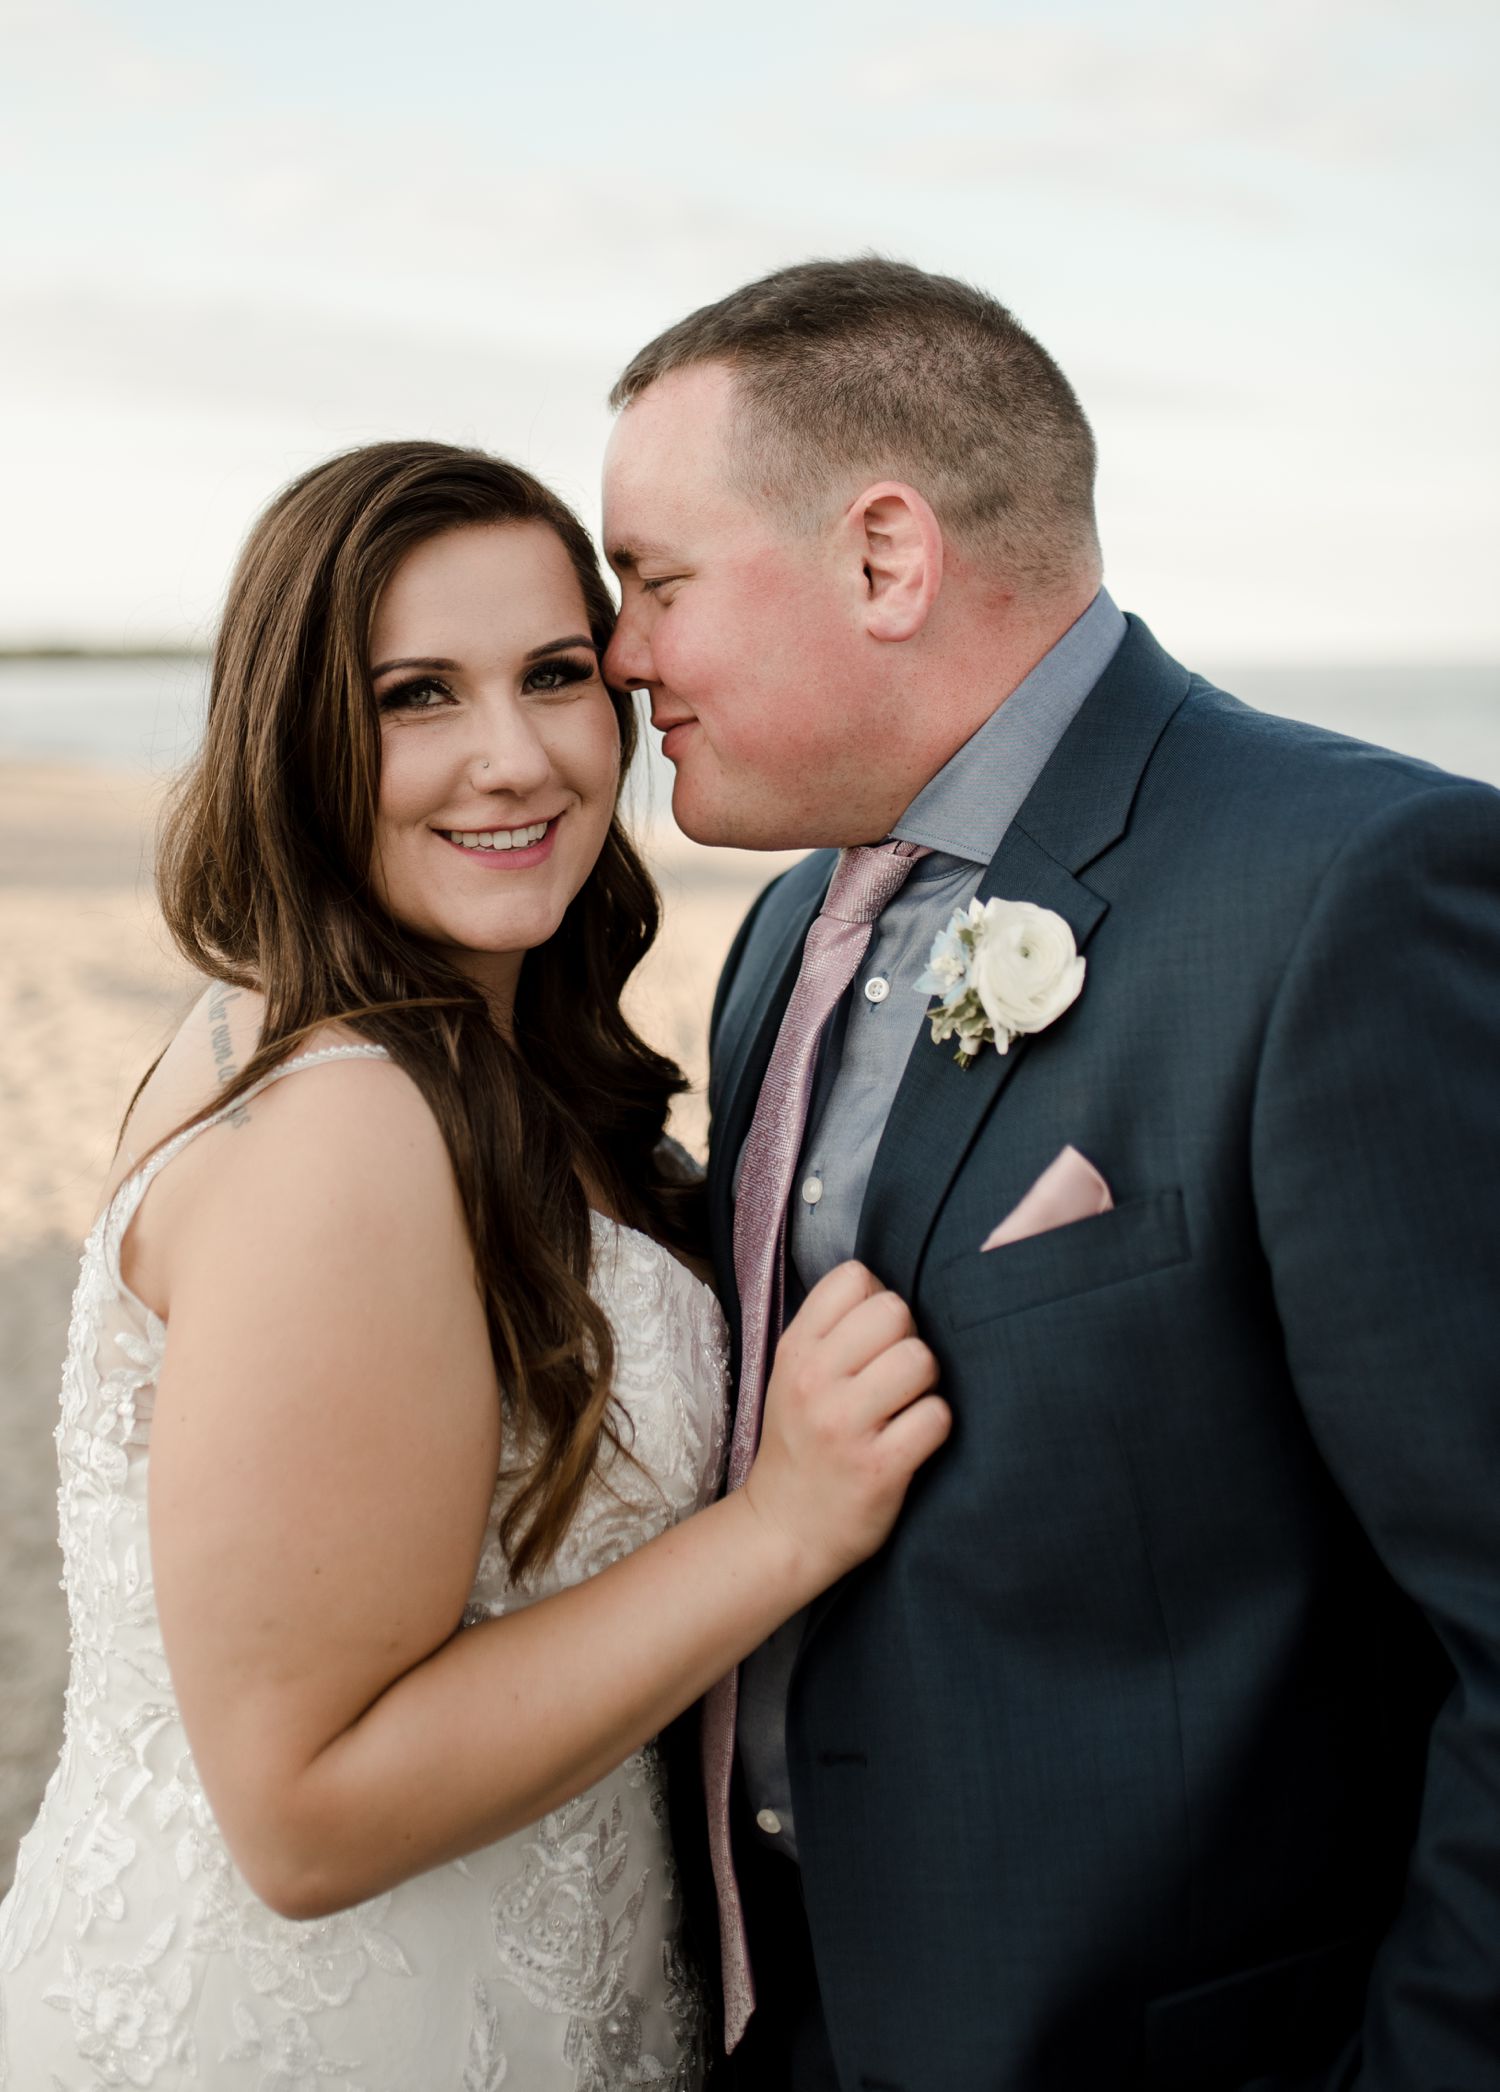 Gimli wedding couple on a beach at sunset, flowers by Stonehouse weddings, planned by Feast and festivities, photos by Vanessa Renae Photography, a winnipeg wedding and elopement photographer